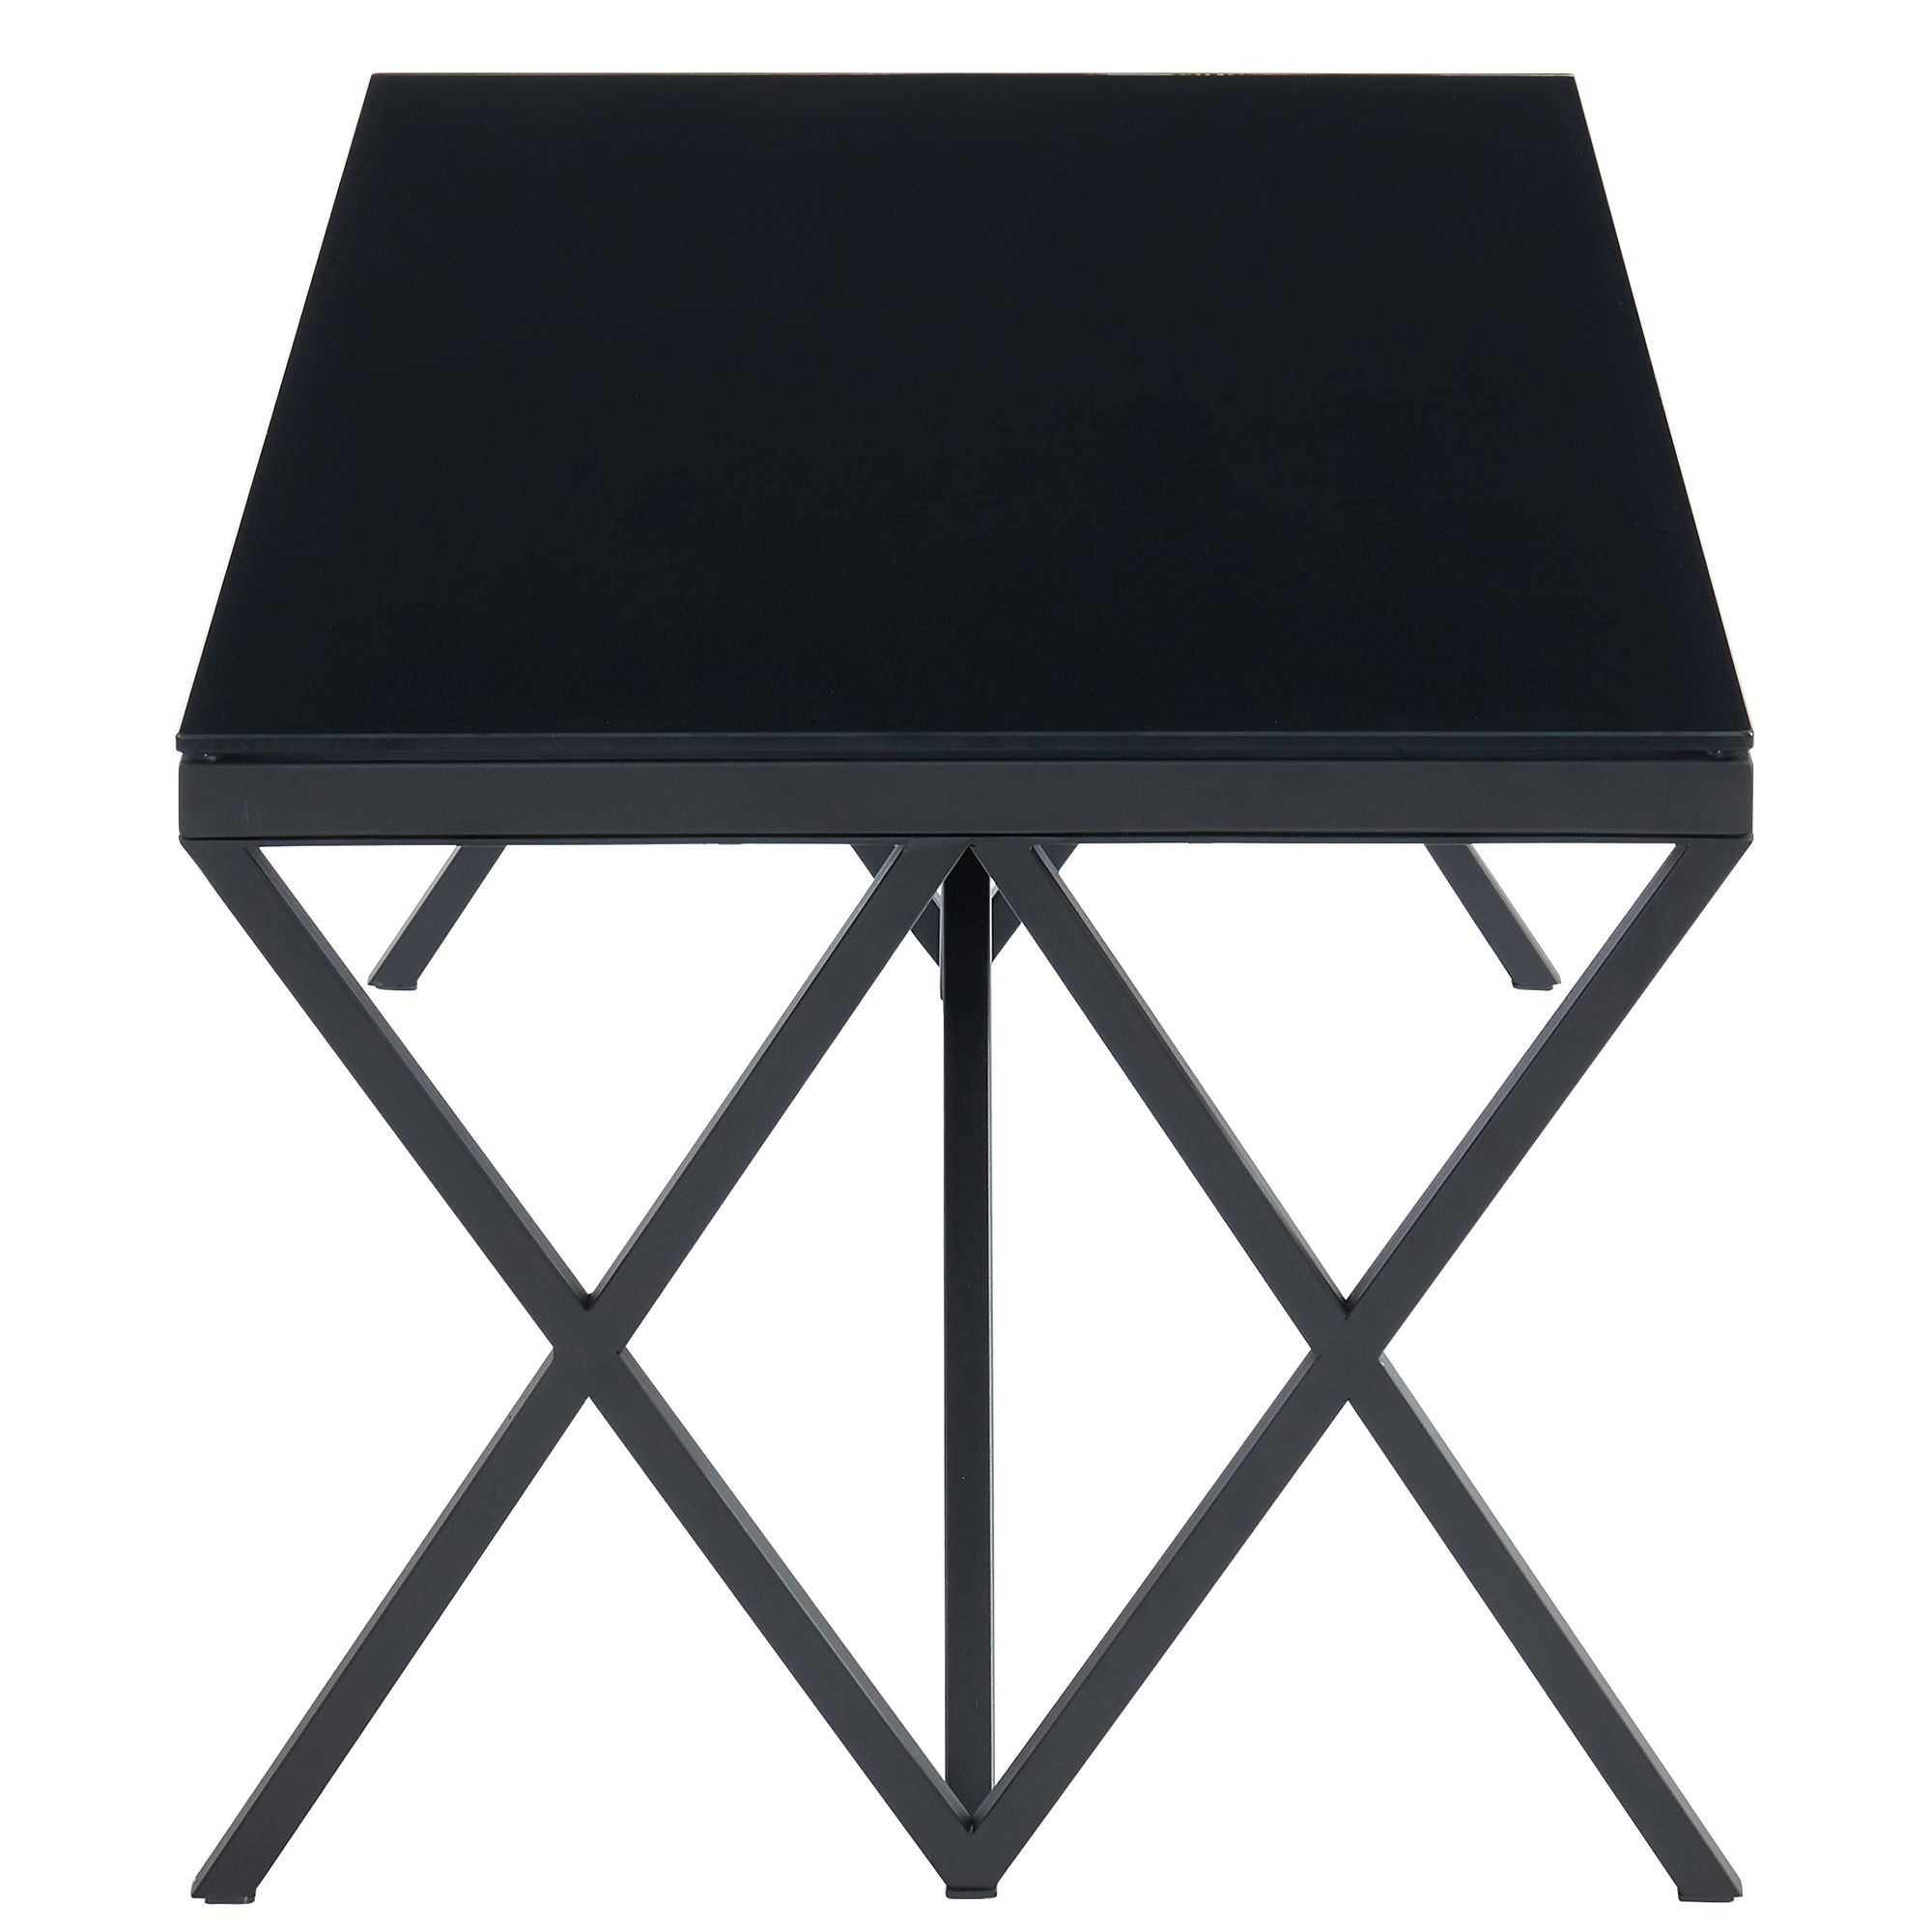 Calix Coffee Table In Black – Aux Merveilles Intended For Addison&lane Calix Square Tables (View 3 of 20)